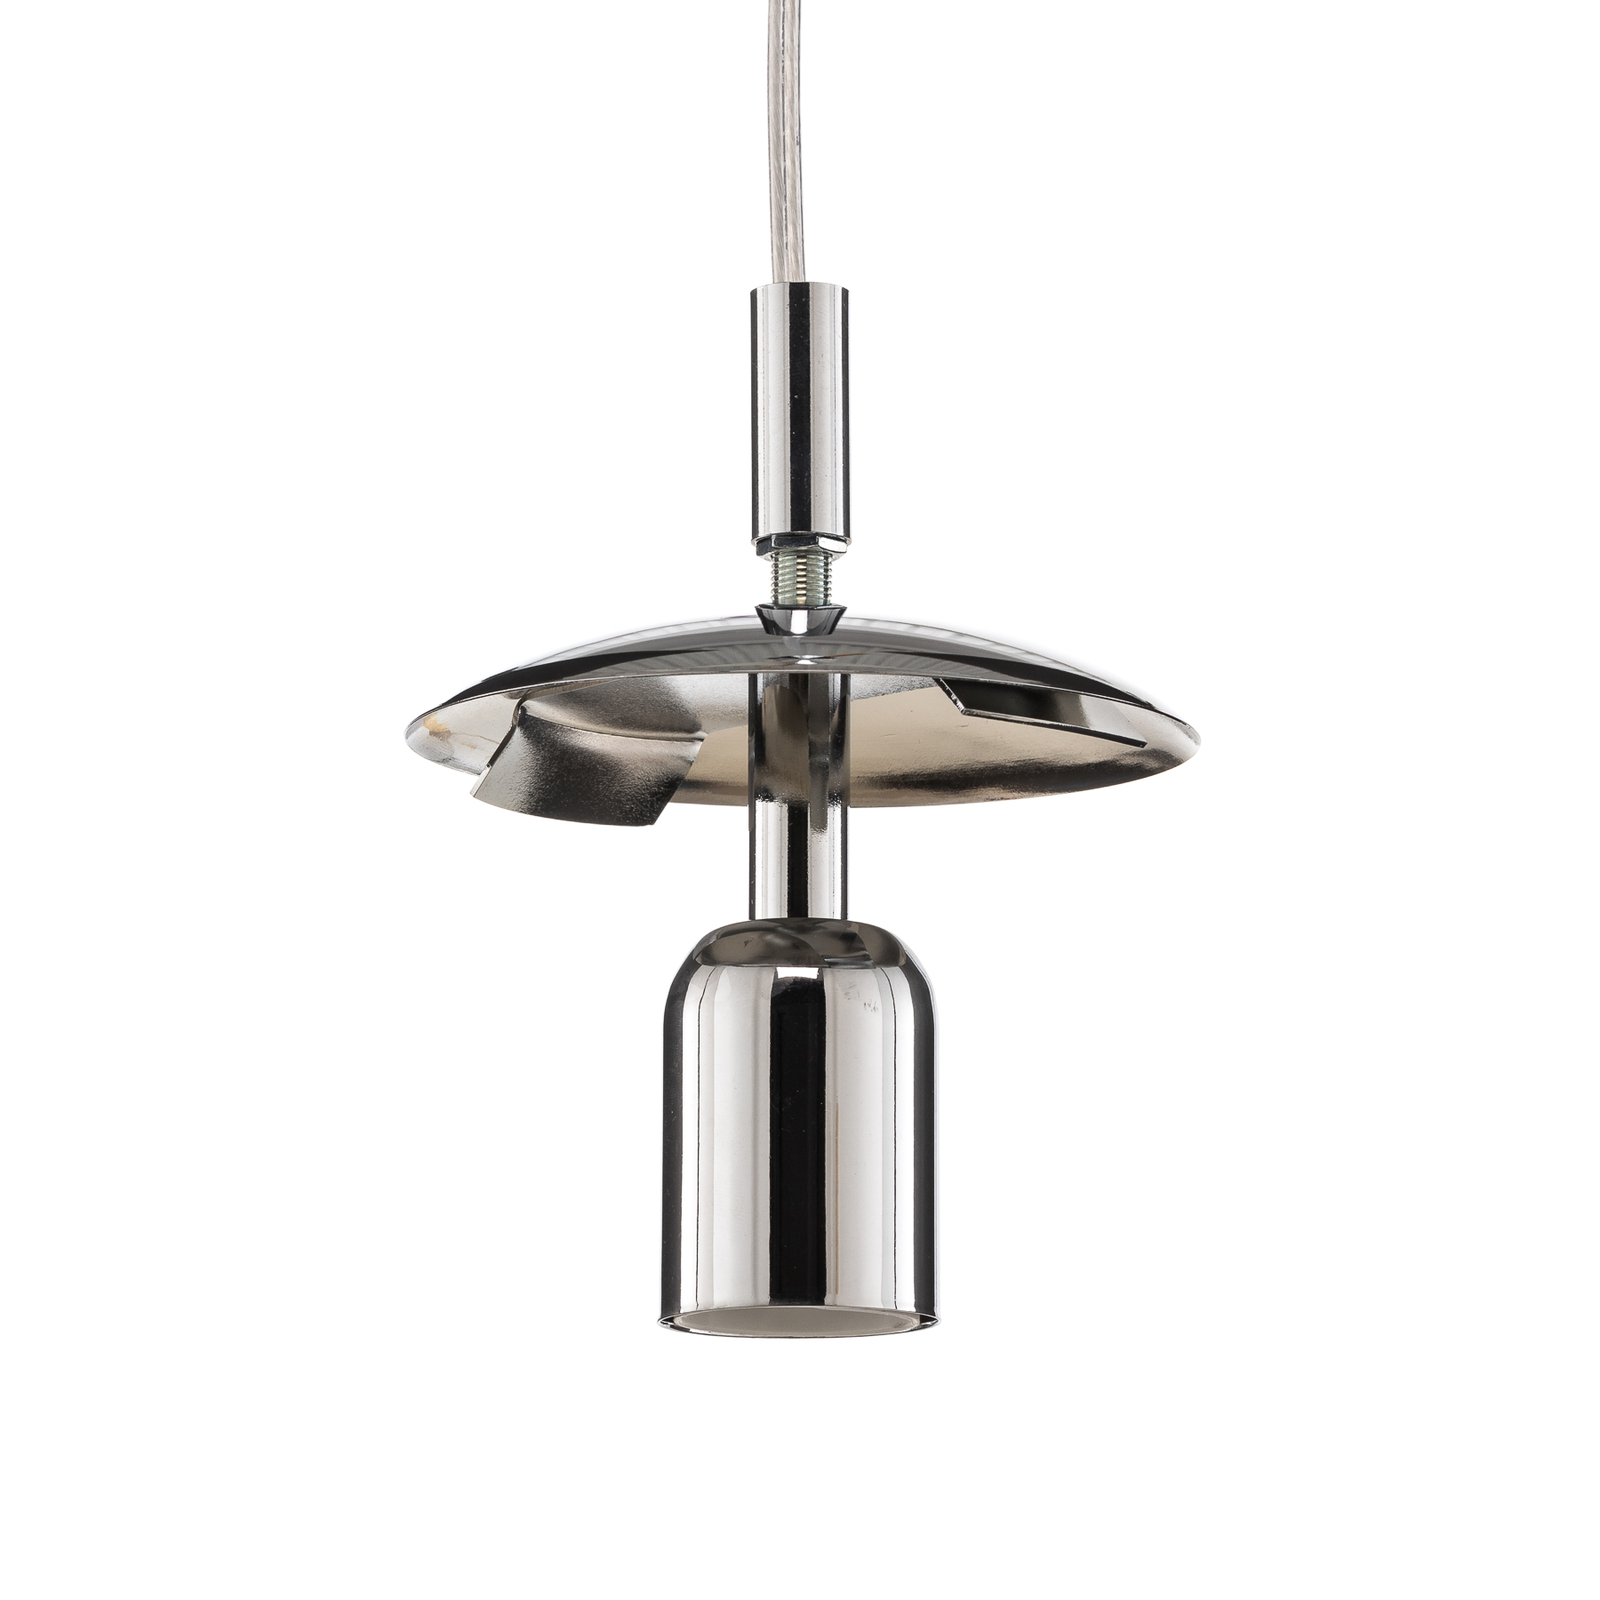 Hanging light 562, clear glass, chrome cap/canopy